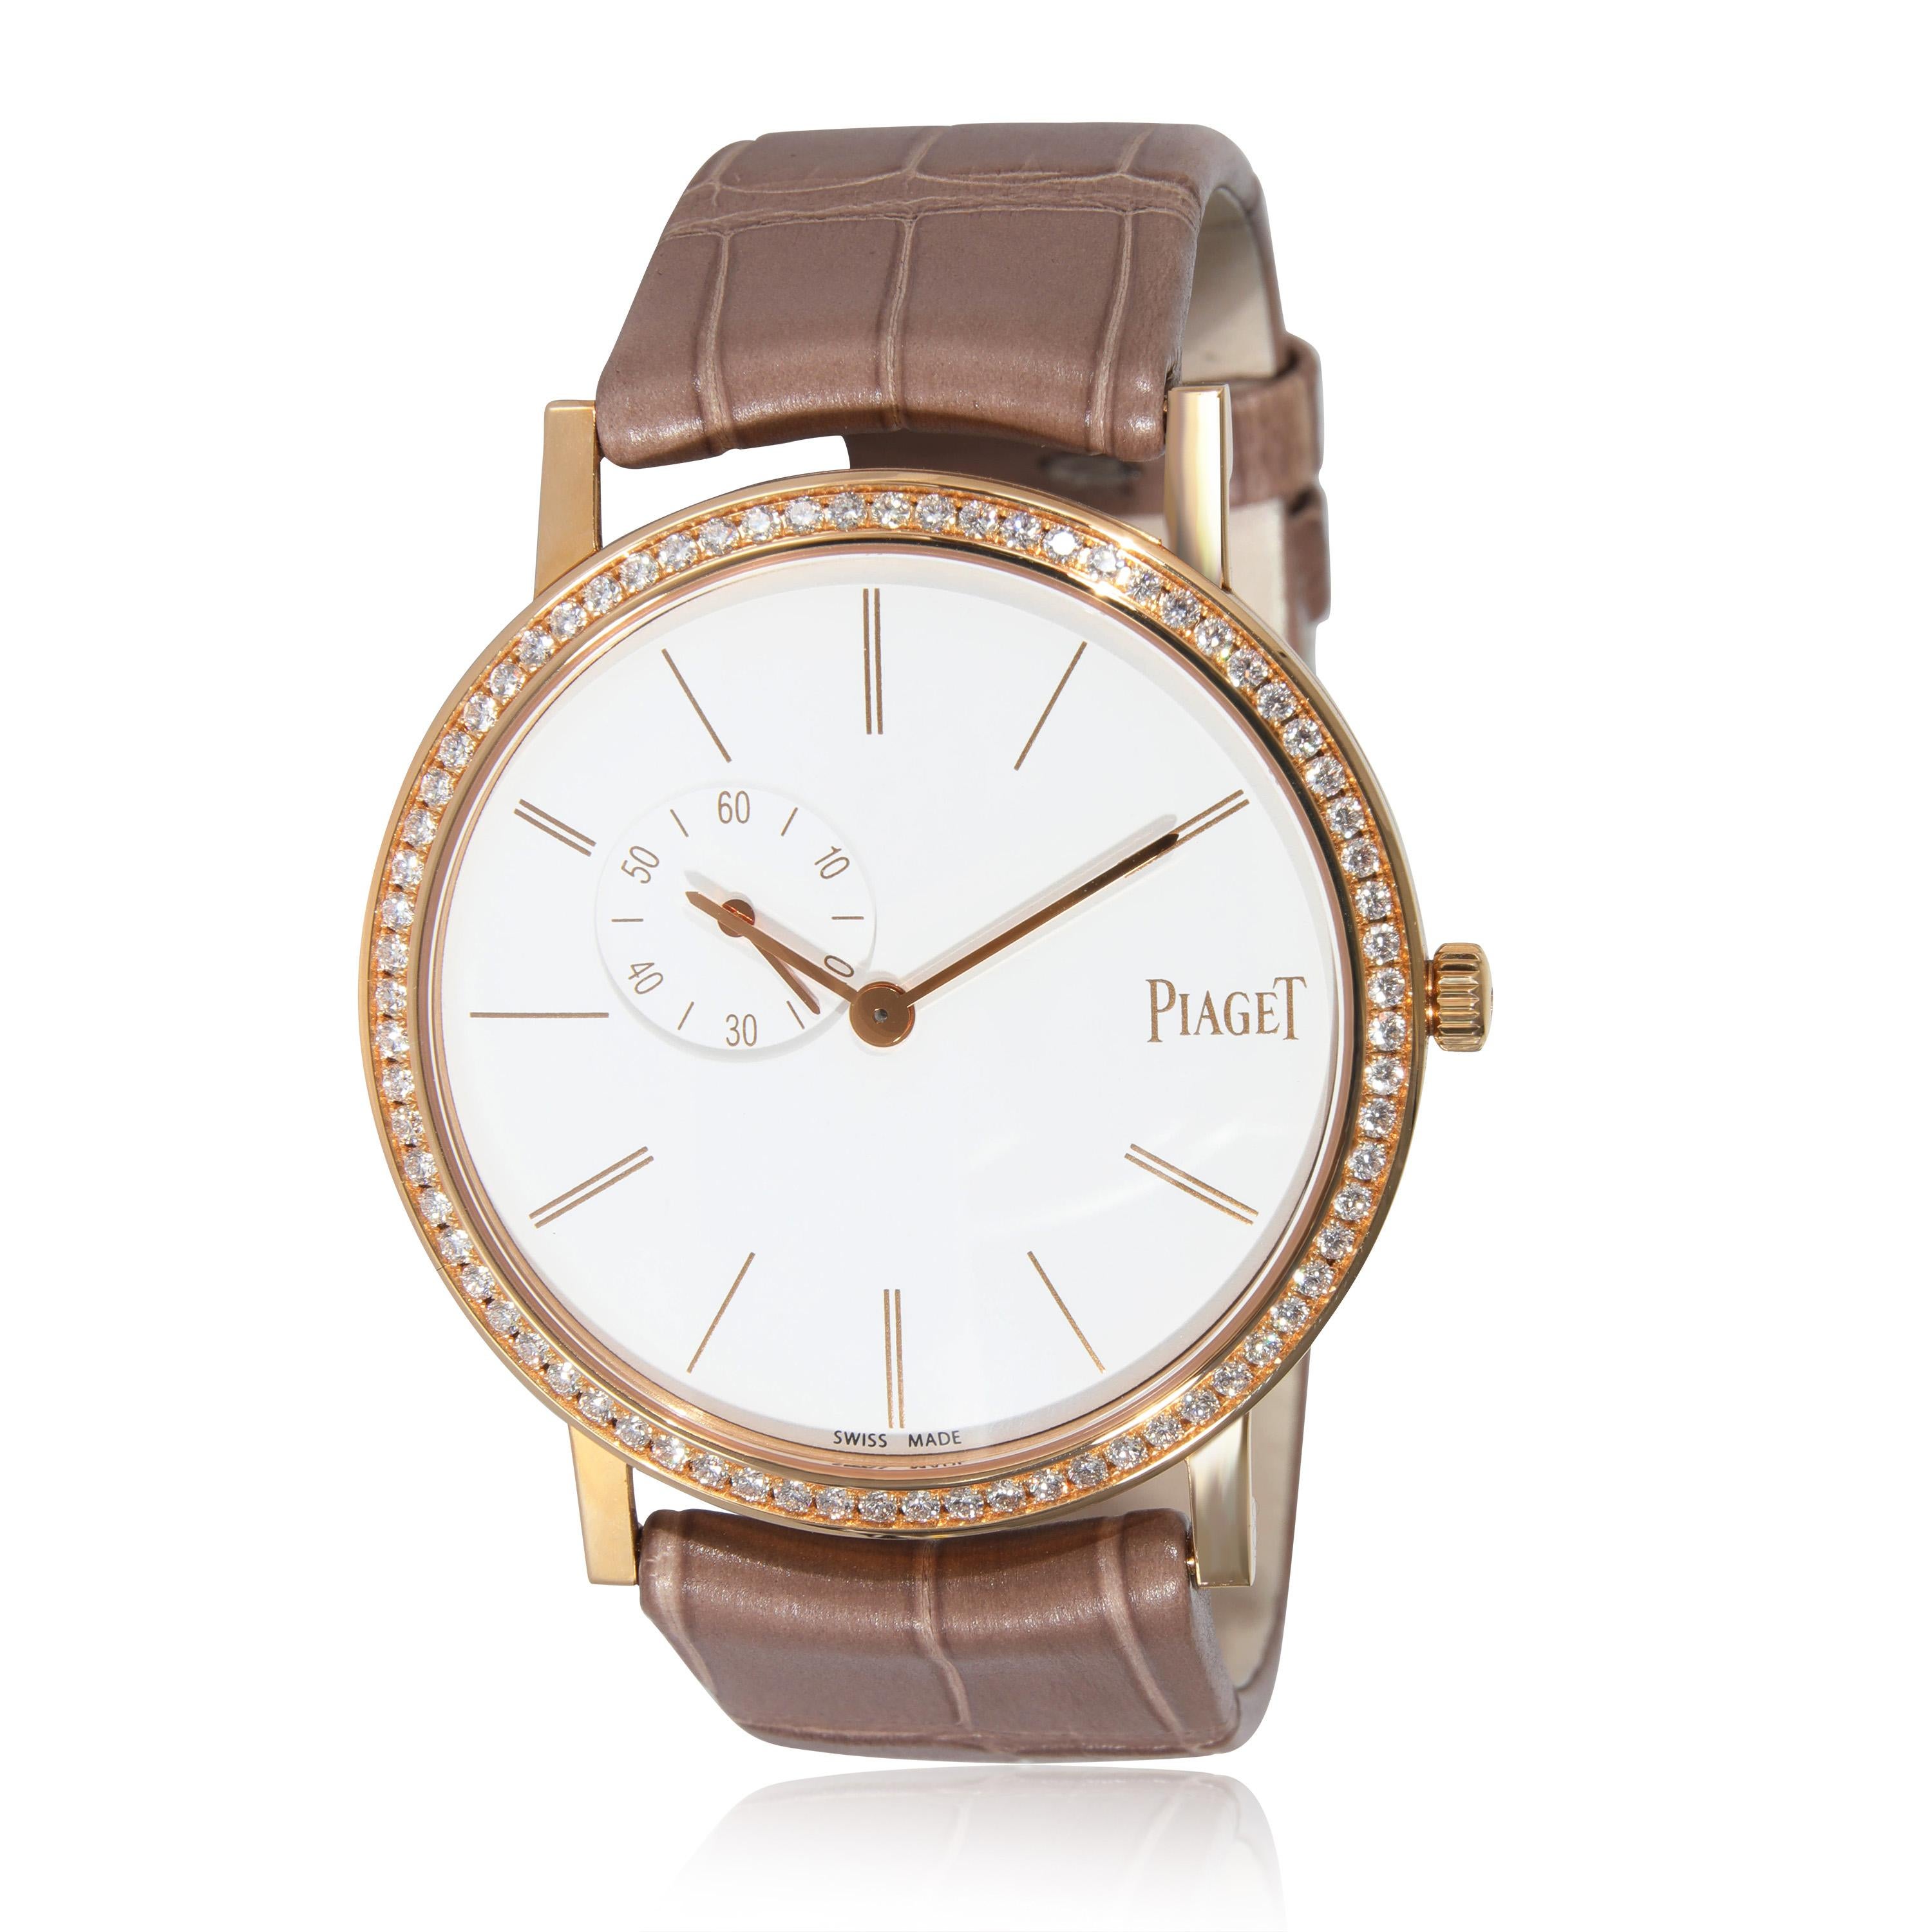 Piaget Altiplano Origin GOA39107 Unisex Watch in 18 Karat Rose Gold In Excellent Condition For Sale In New York, NY